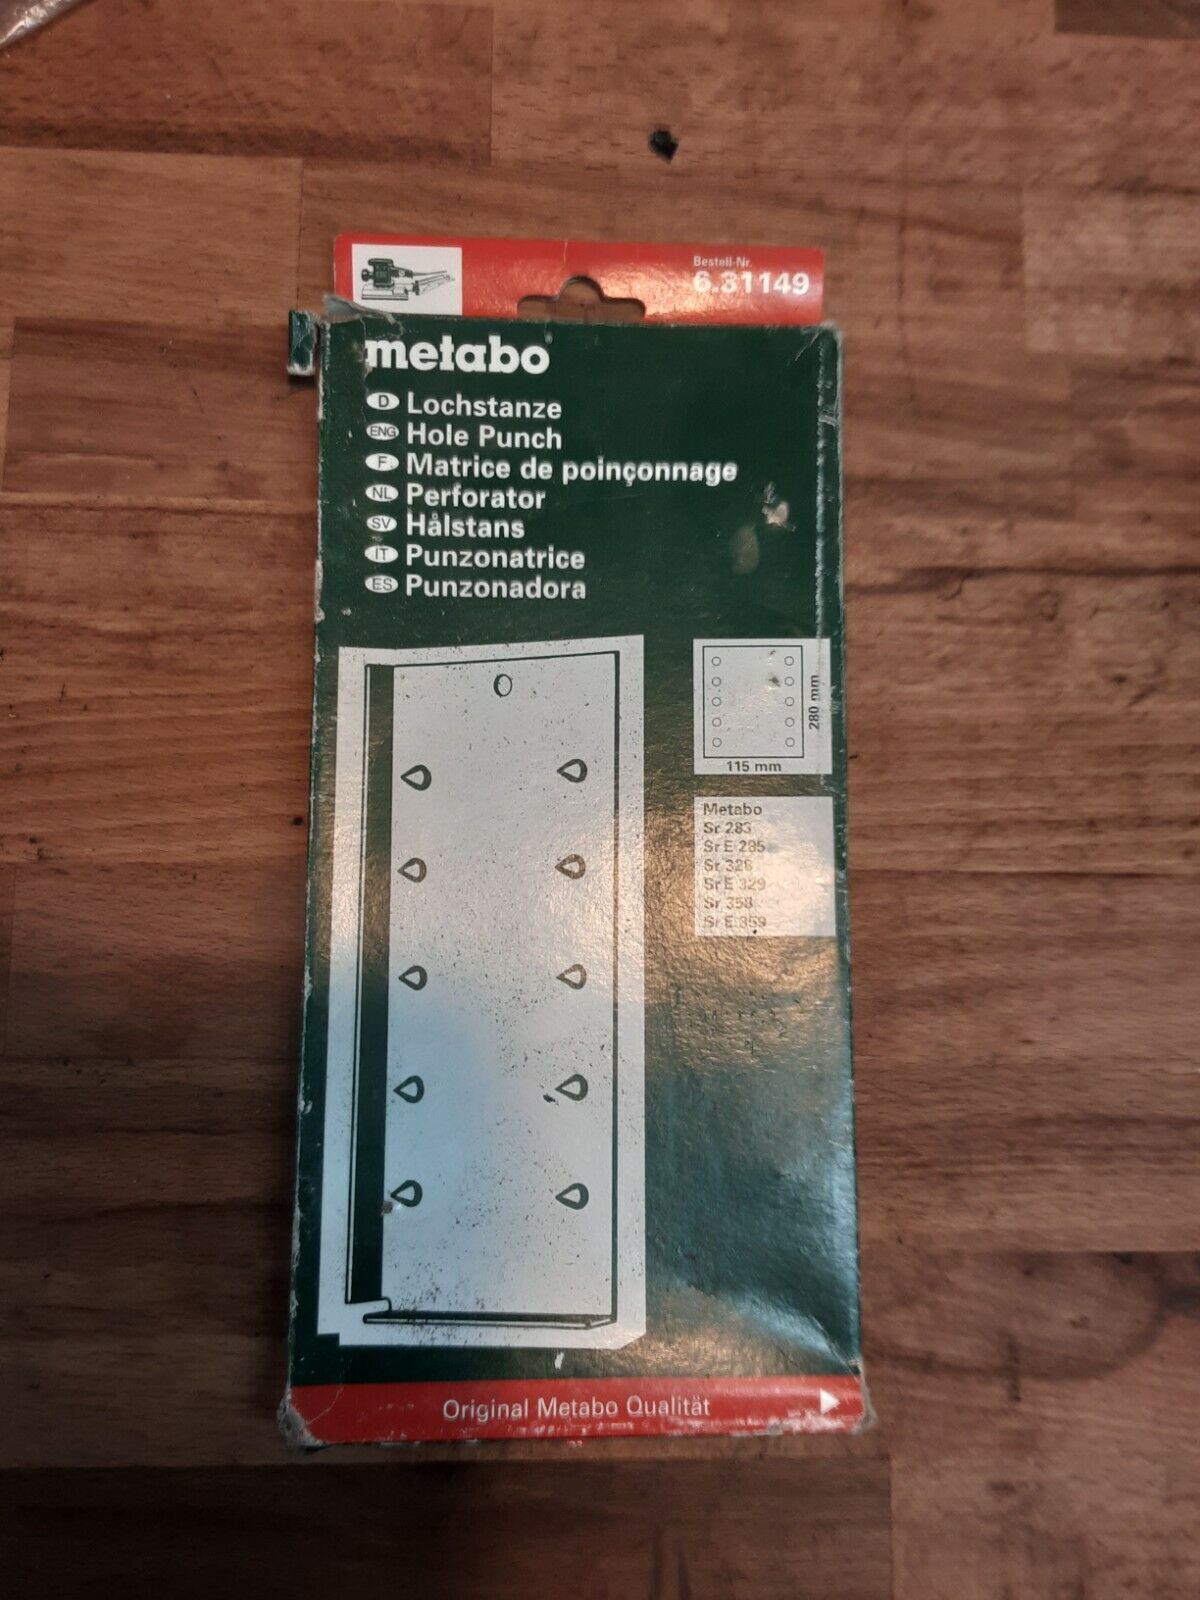 Metabo Hole Punch / base plate 3612C. Tatty box kept in workshop. 6.31149